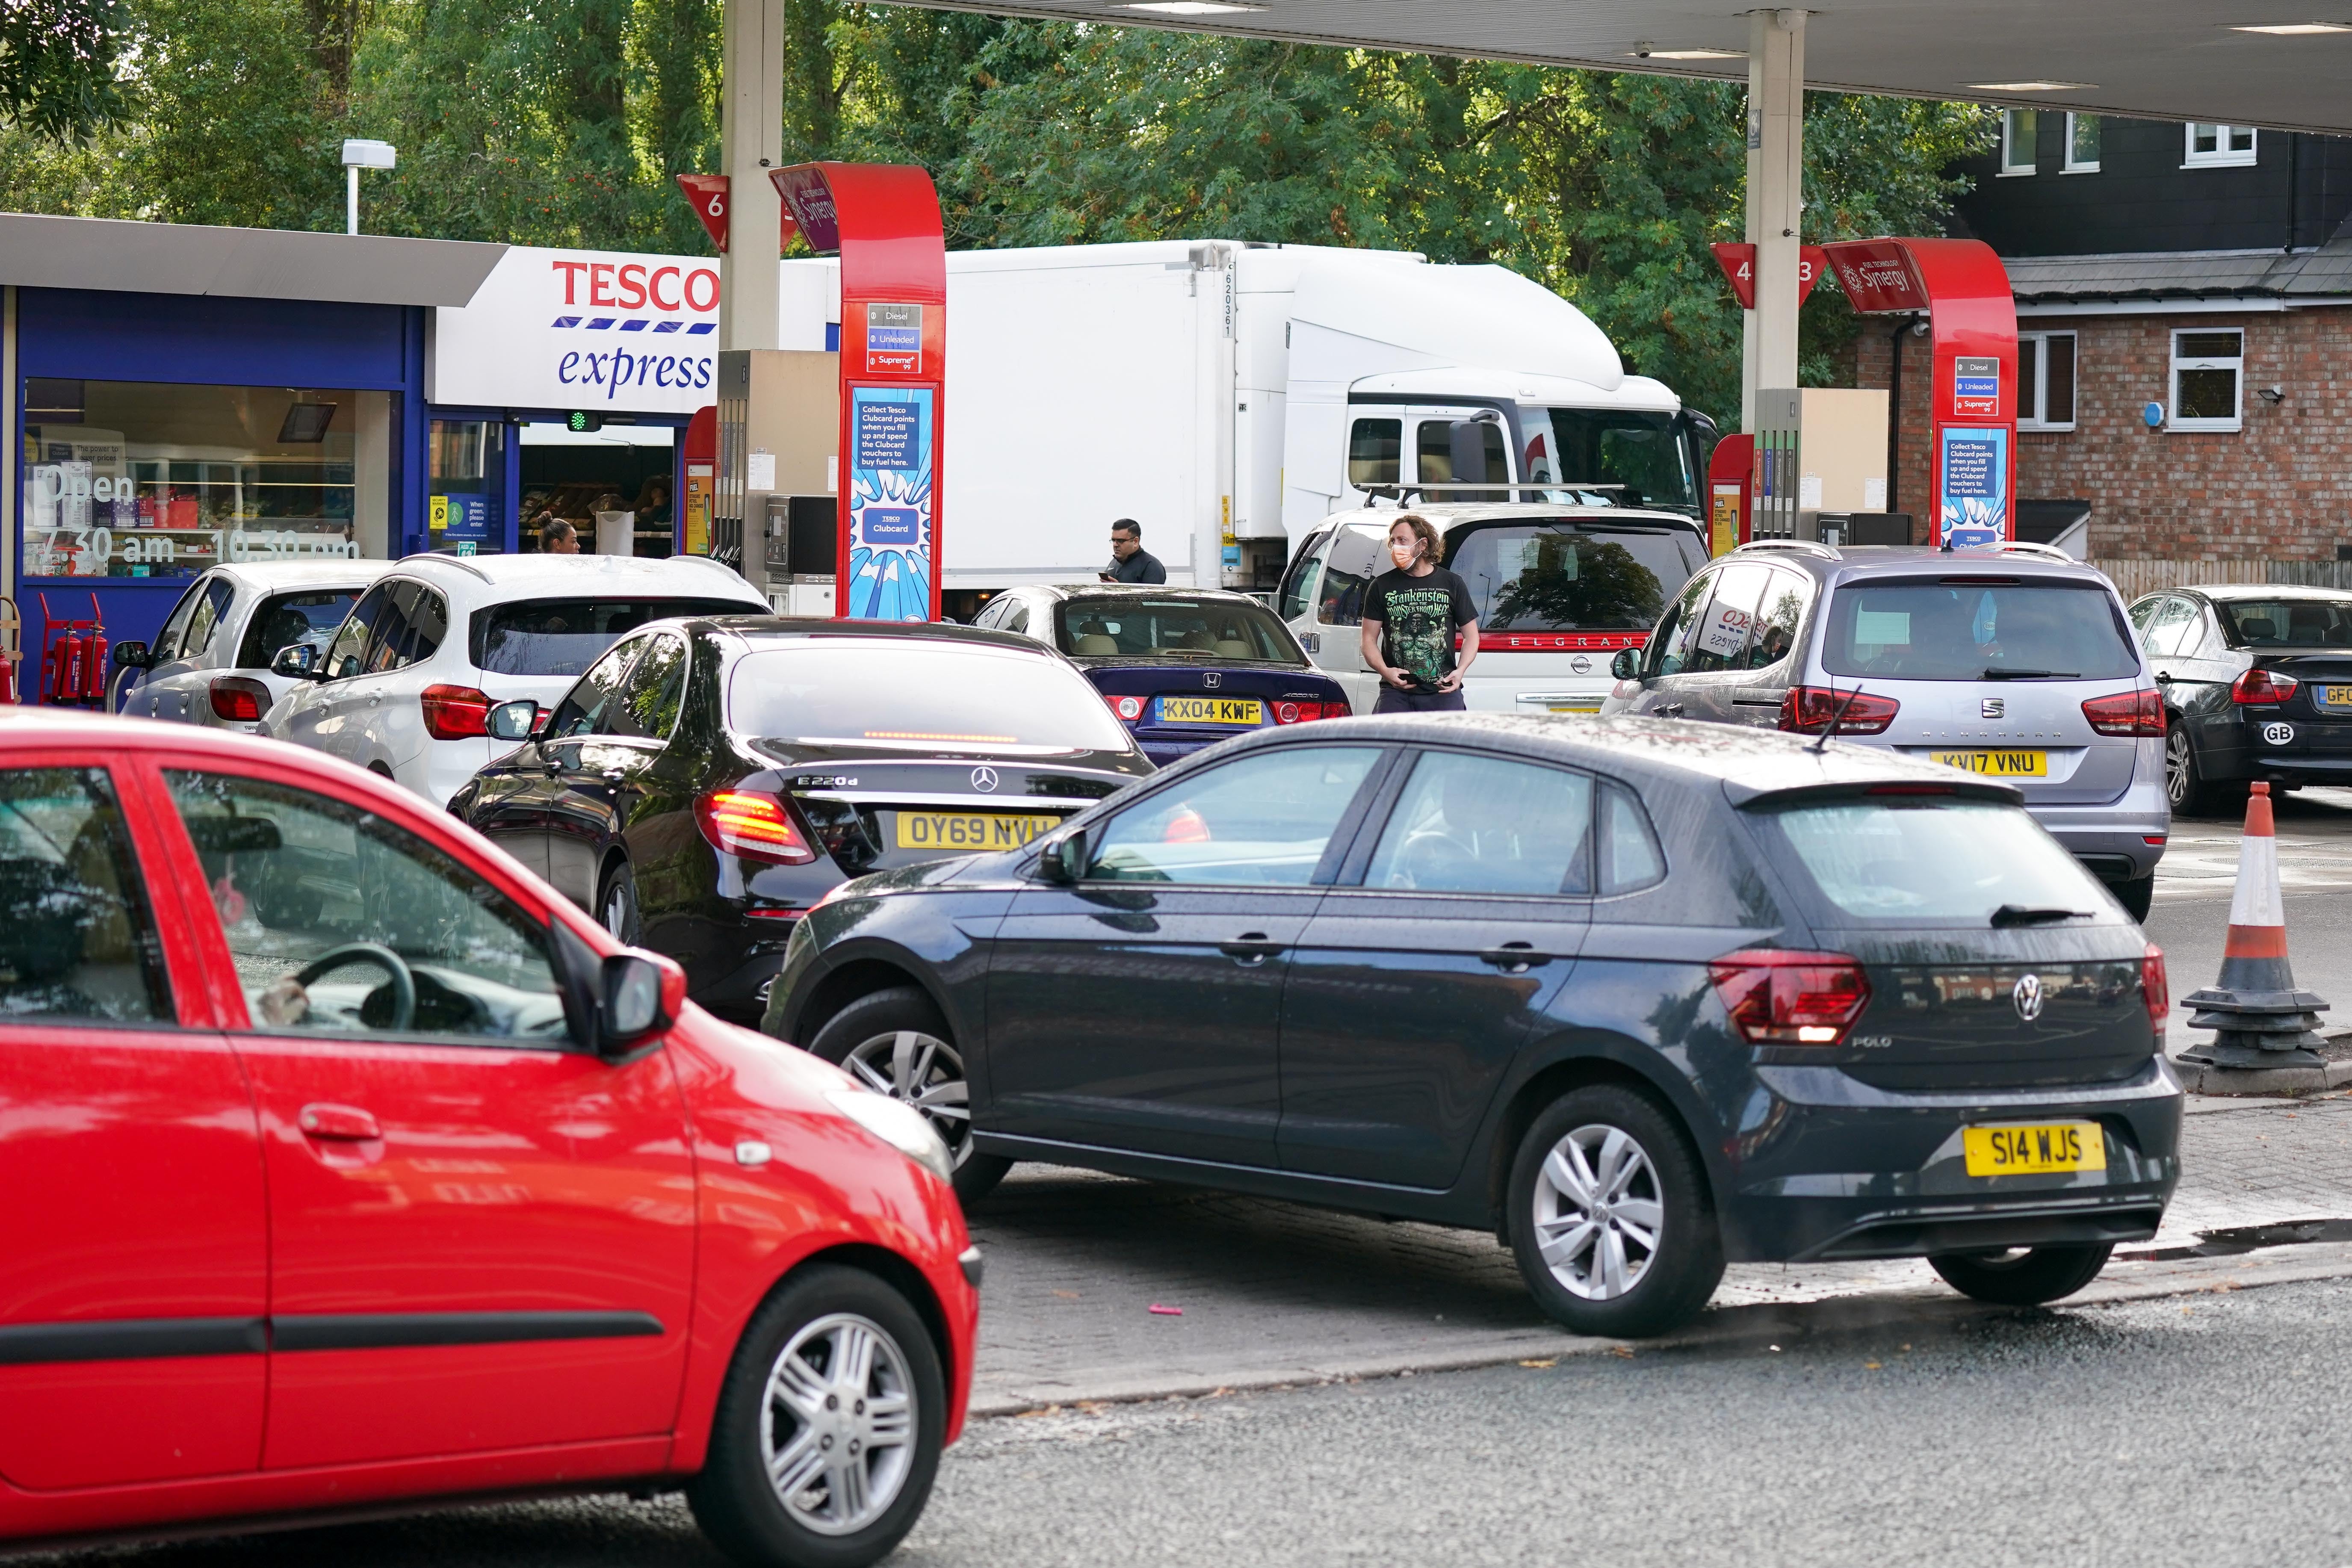 Violence continues at forecourts amidst the petrol crisis